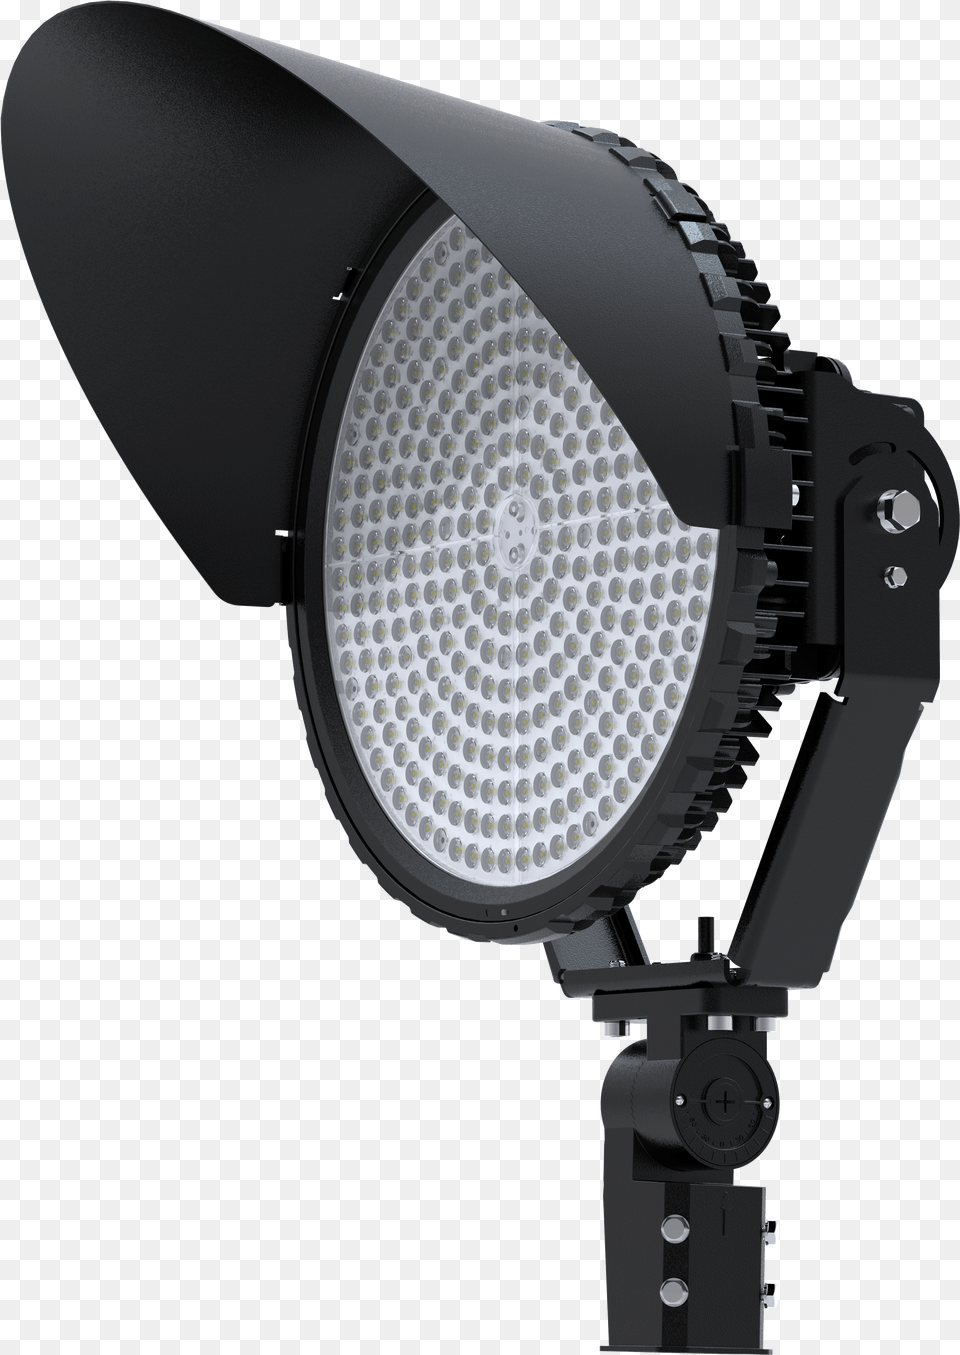 Led Flood Light Outdoor Spotlight Bulb Stadium Lighting Led Flood Light Round, Accessories, Earring, Jewelry, Nature Free Png Download